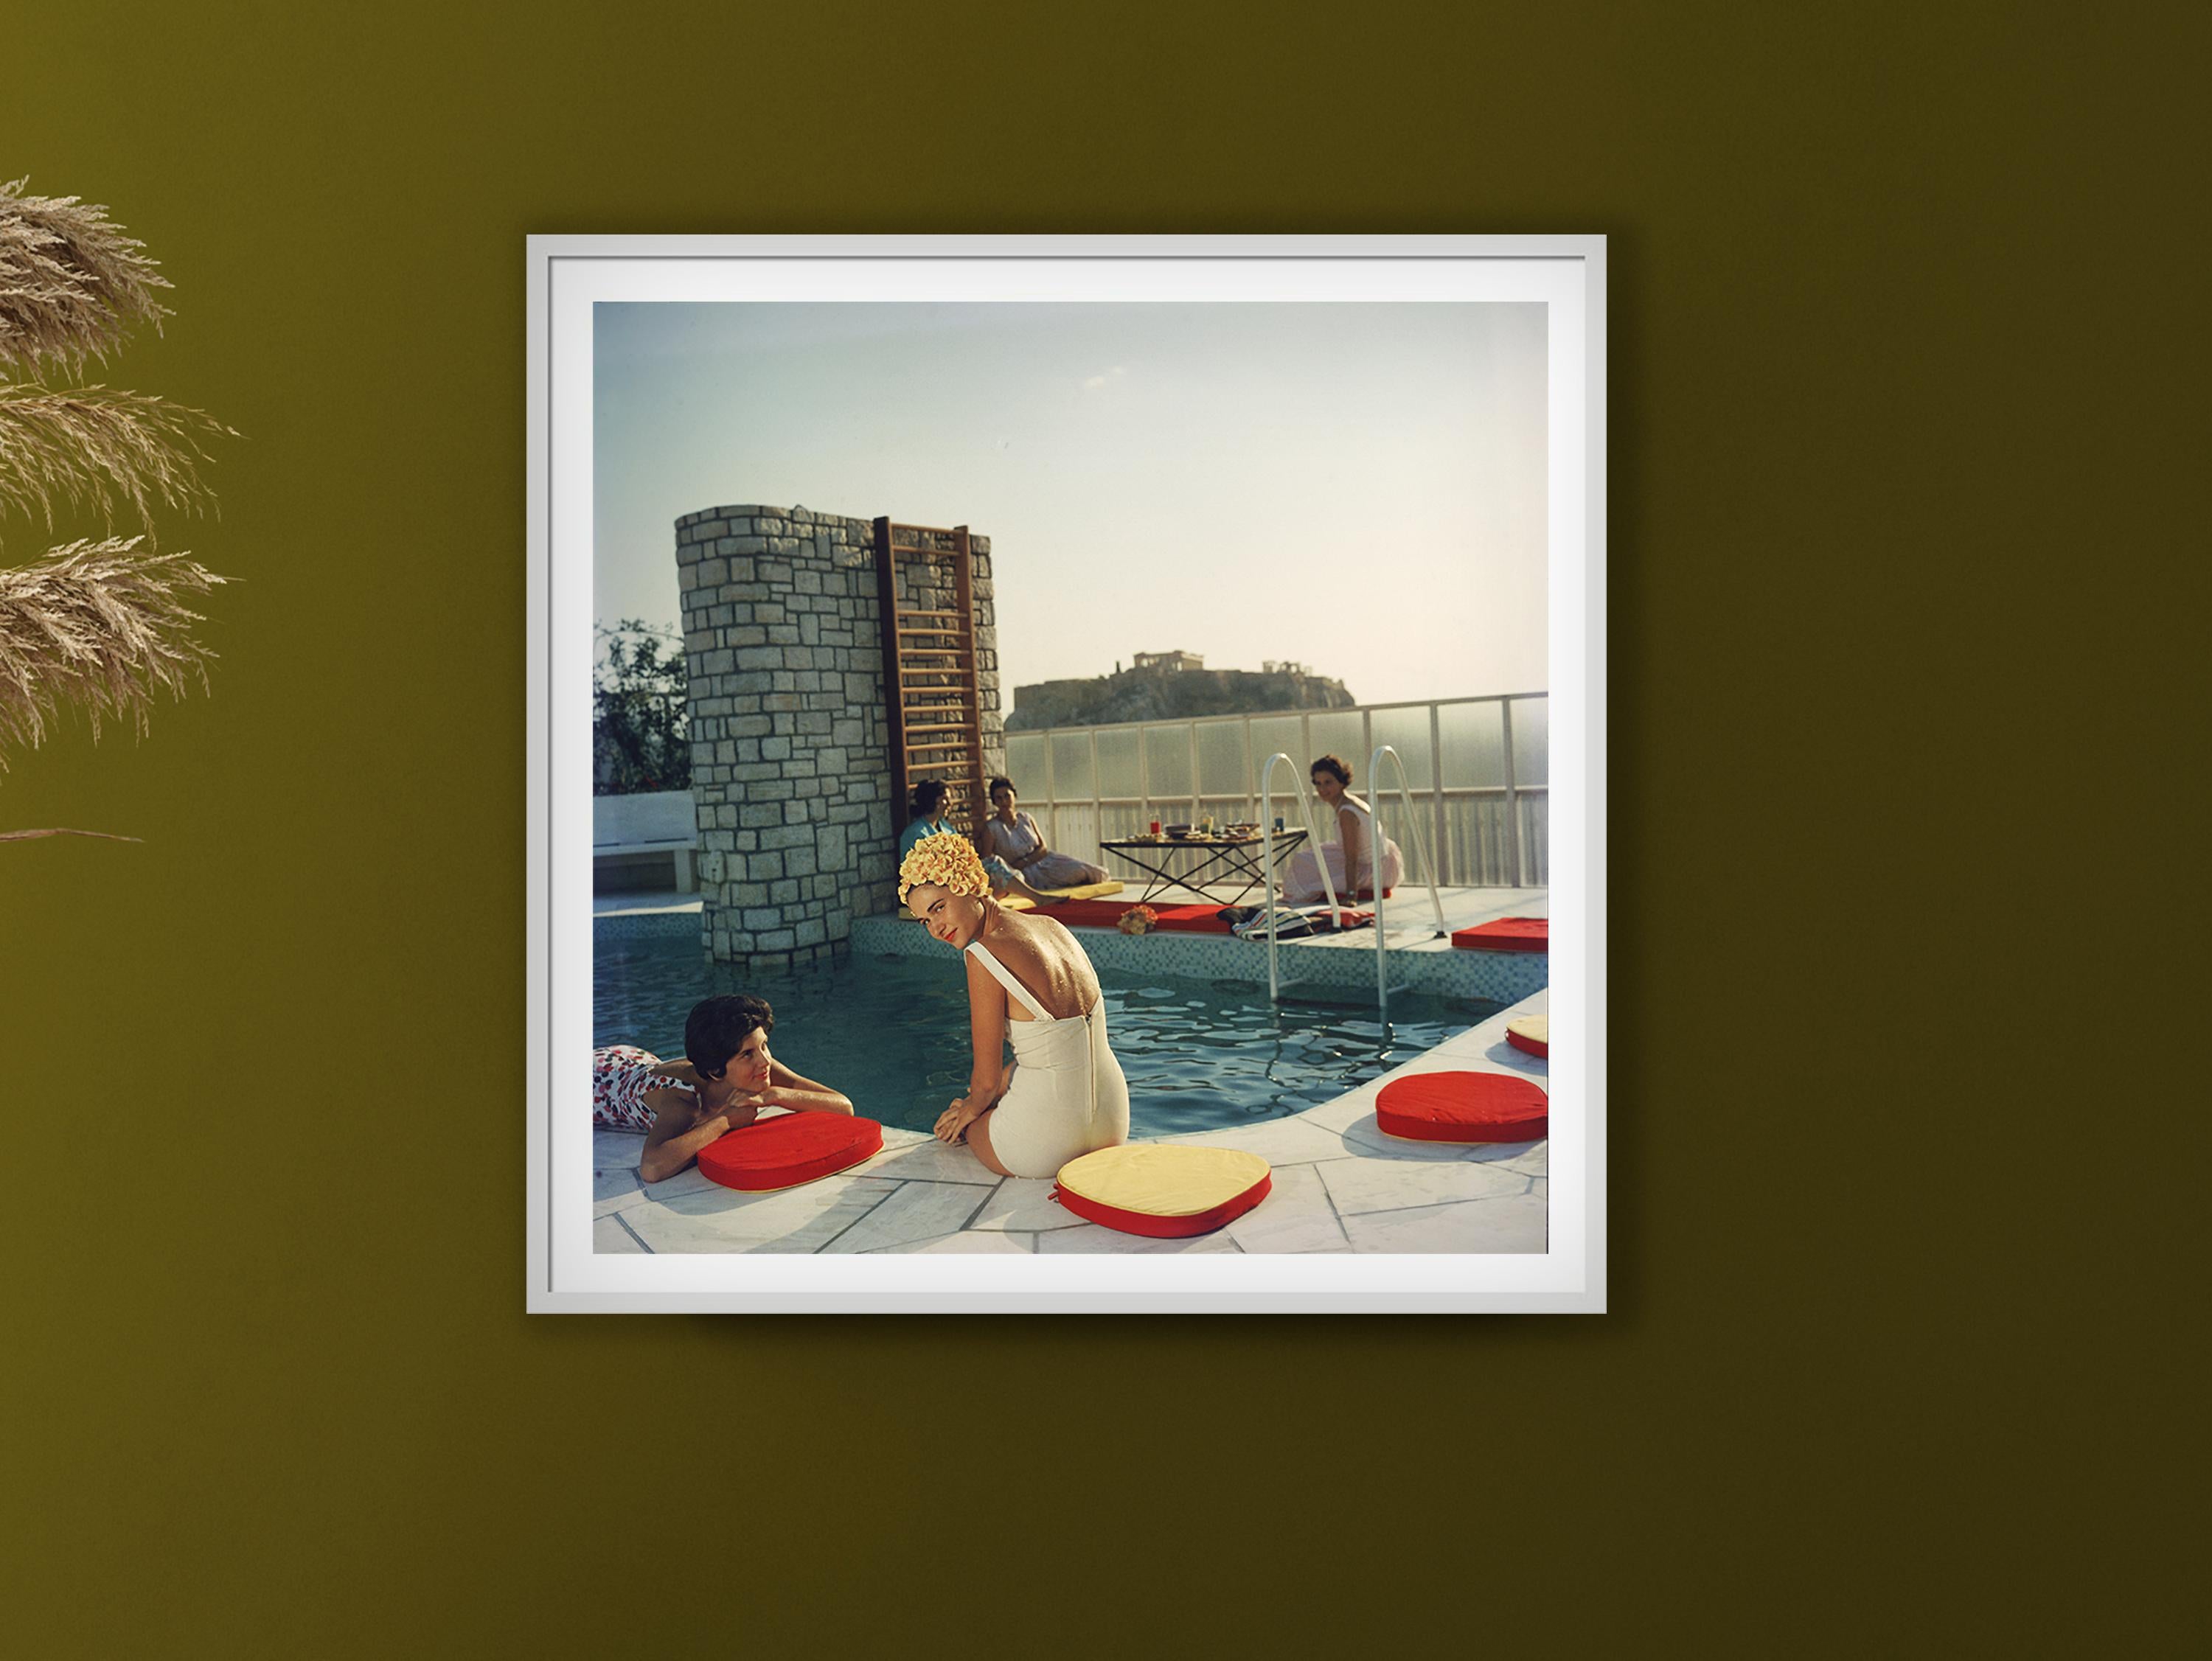 Penthouse Pool, Acropolis, Estate Edition - Photograph by Slim Aarons